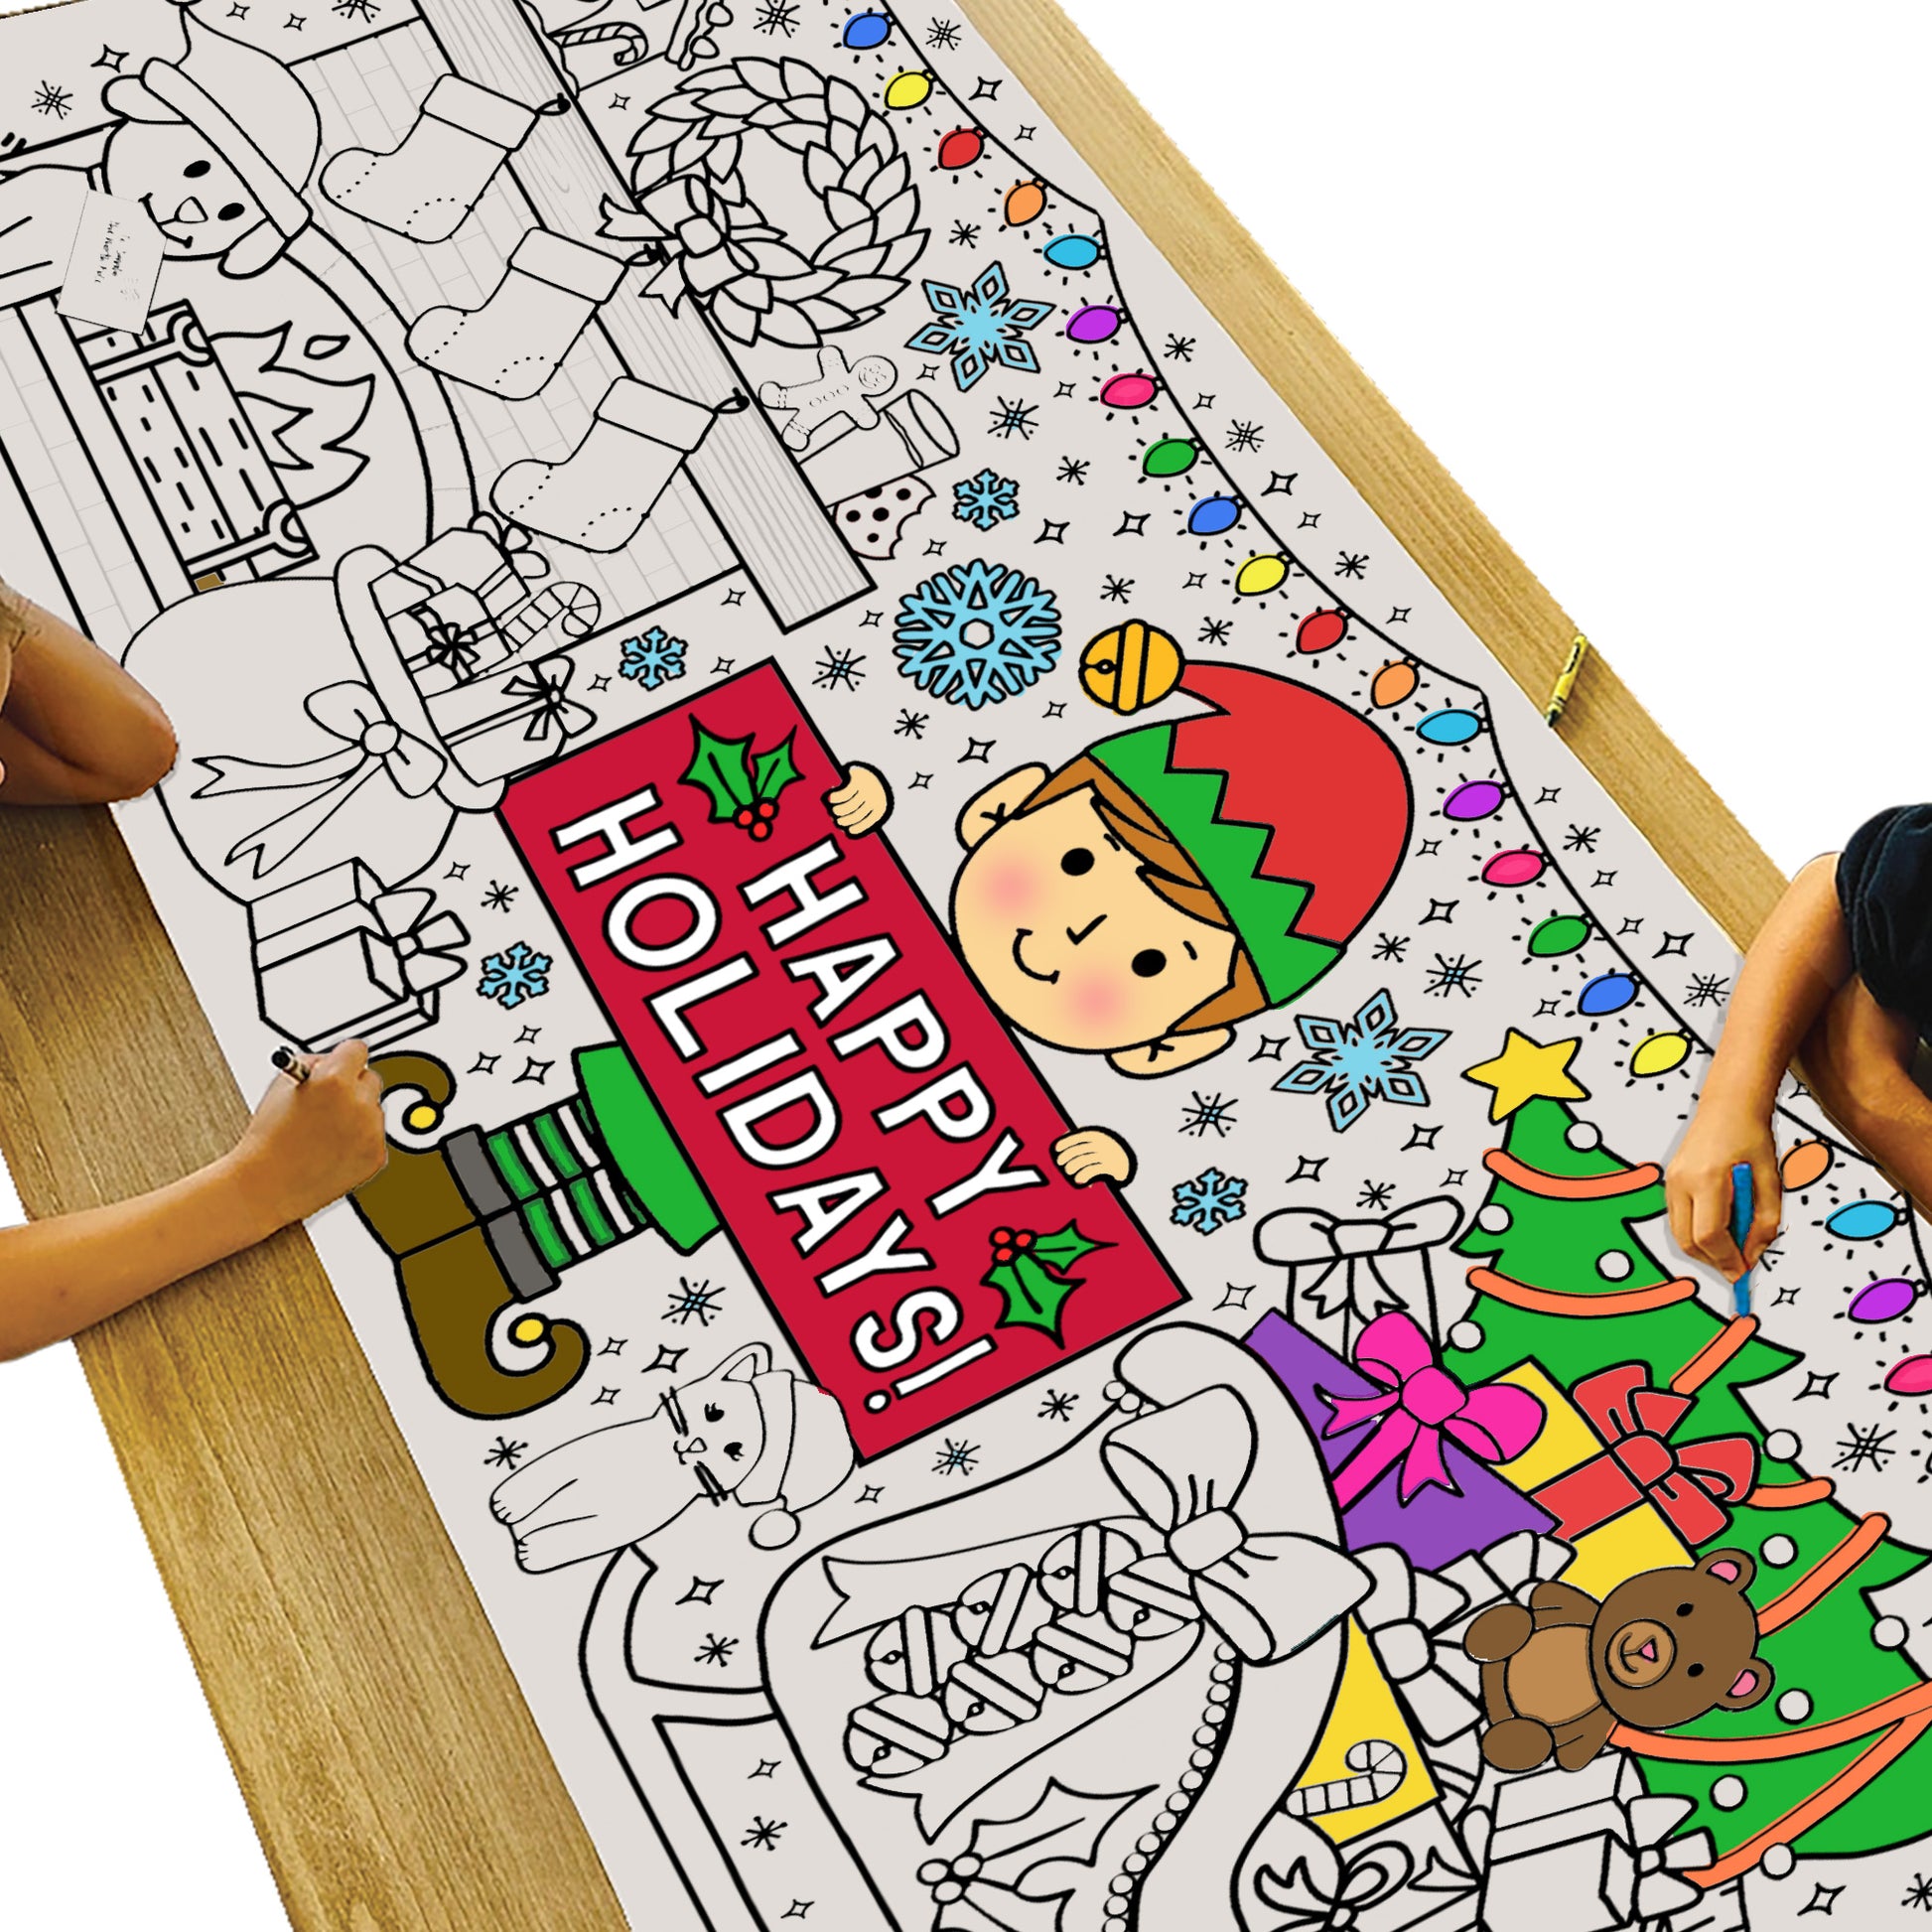 Tiny Expressions Giant Winter Coloring Poster for Kids - 30 x 72 Inches  Jumbo Paper Banner